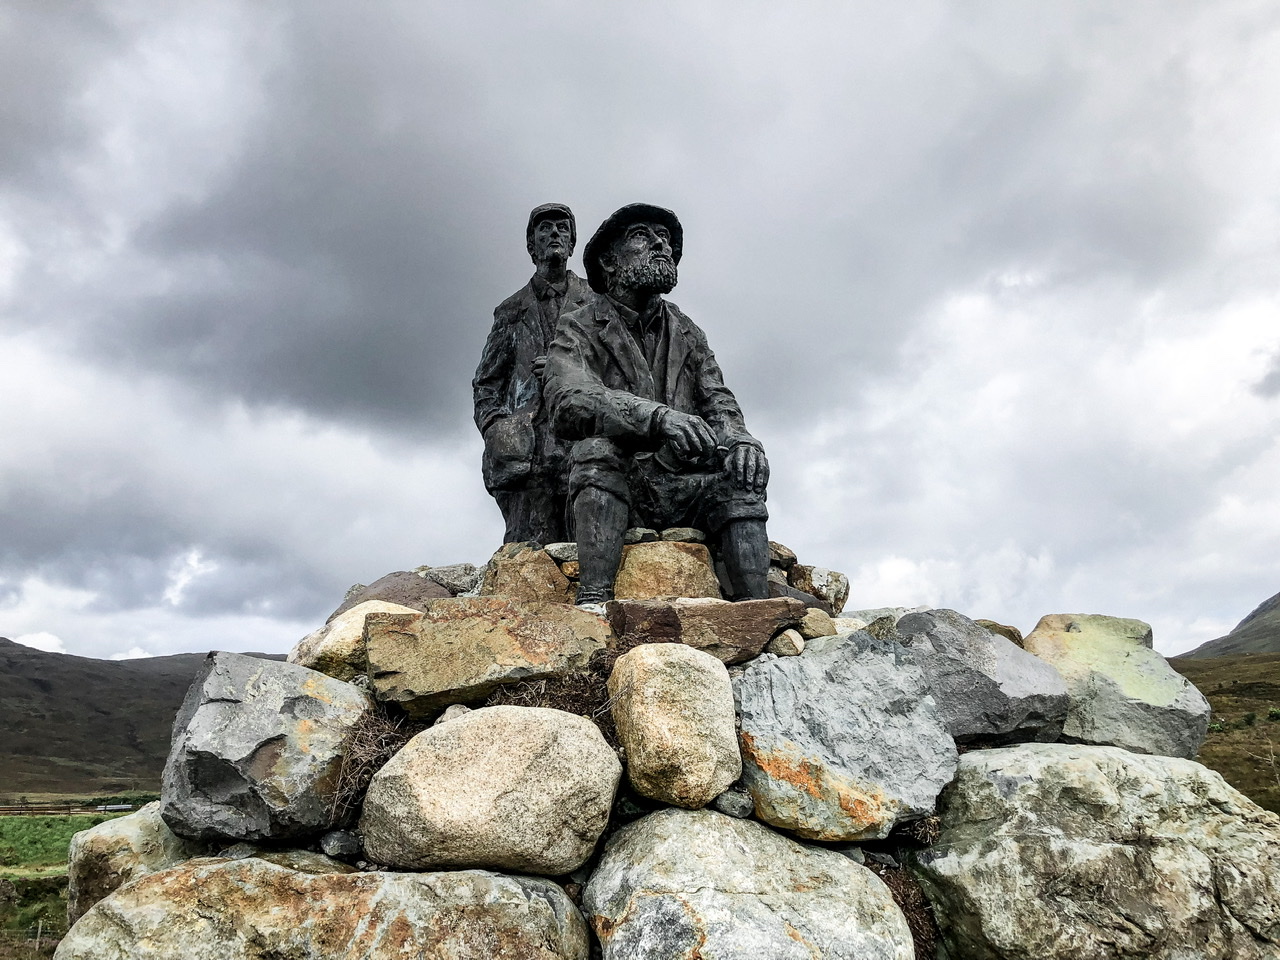 Statue of two explorers, one standing behind a seated one on top of a pile of rocks